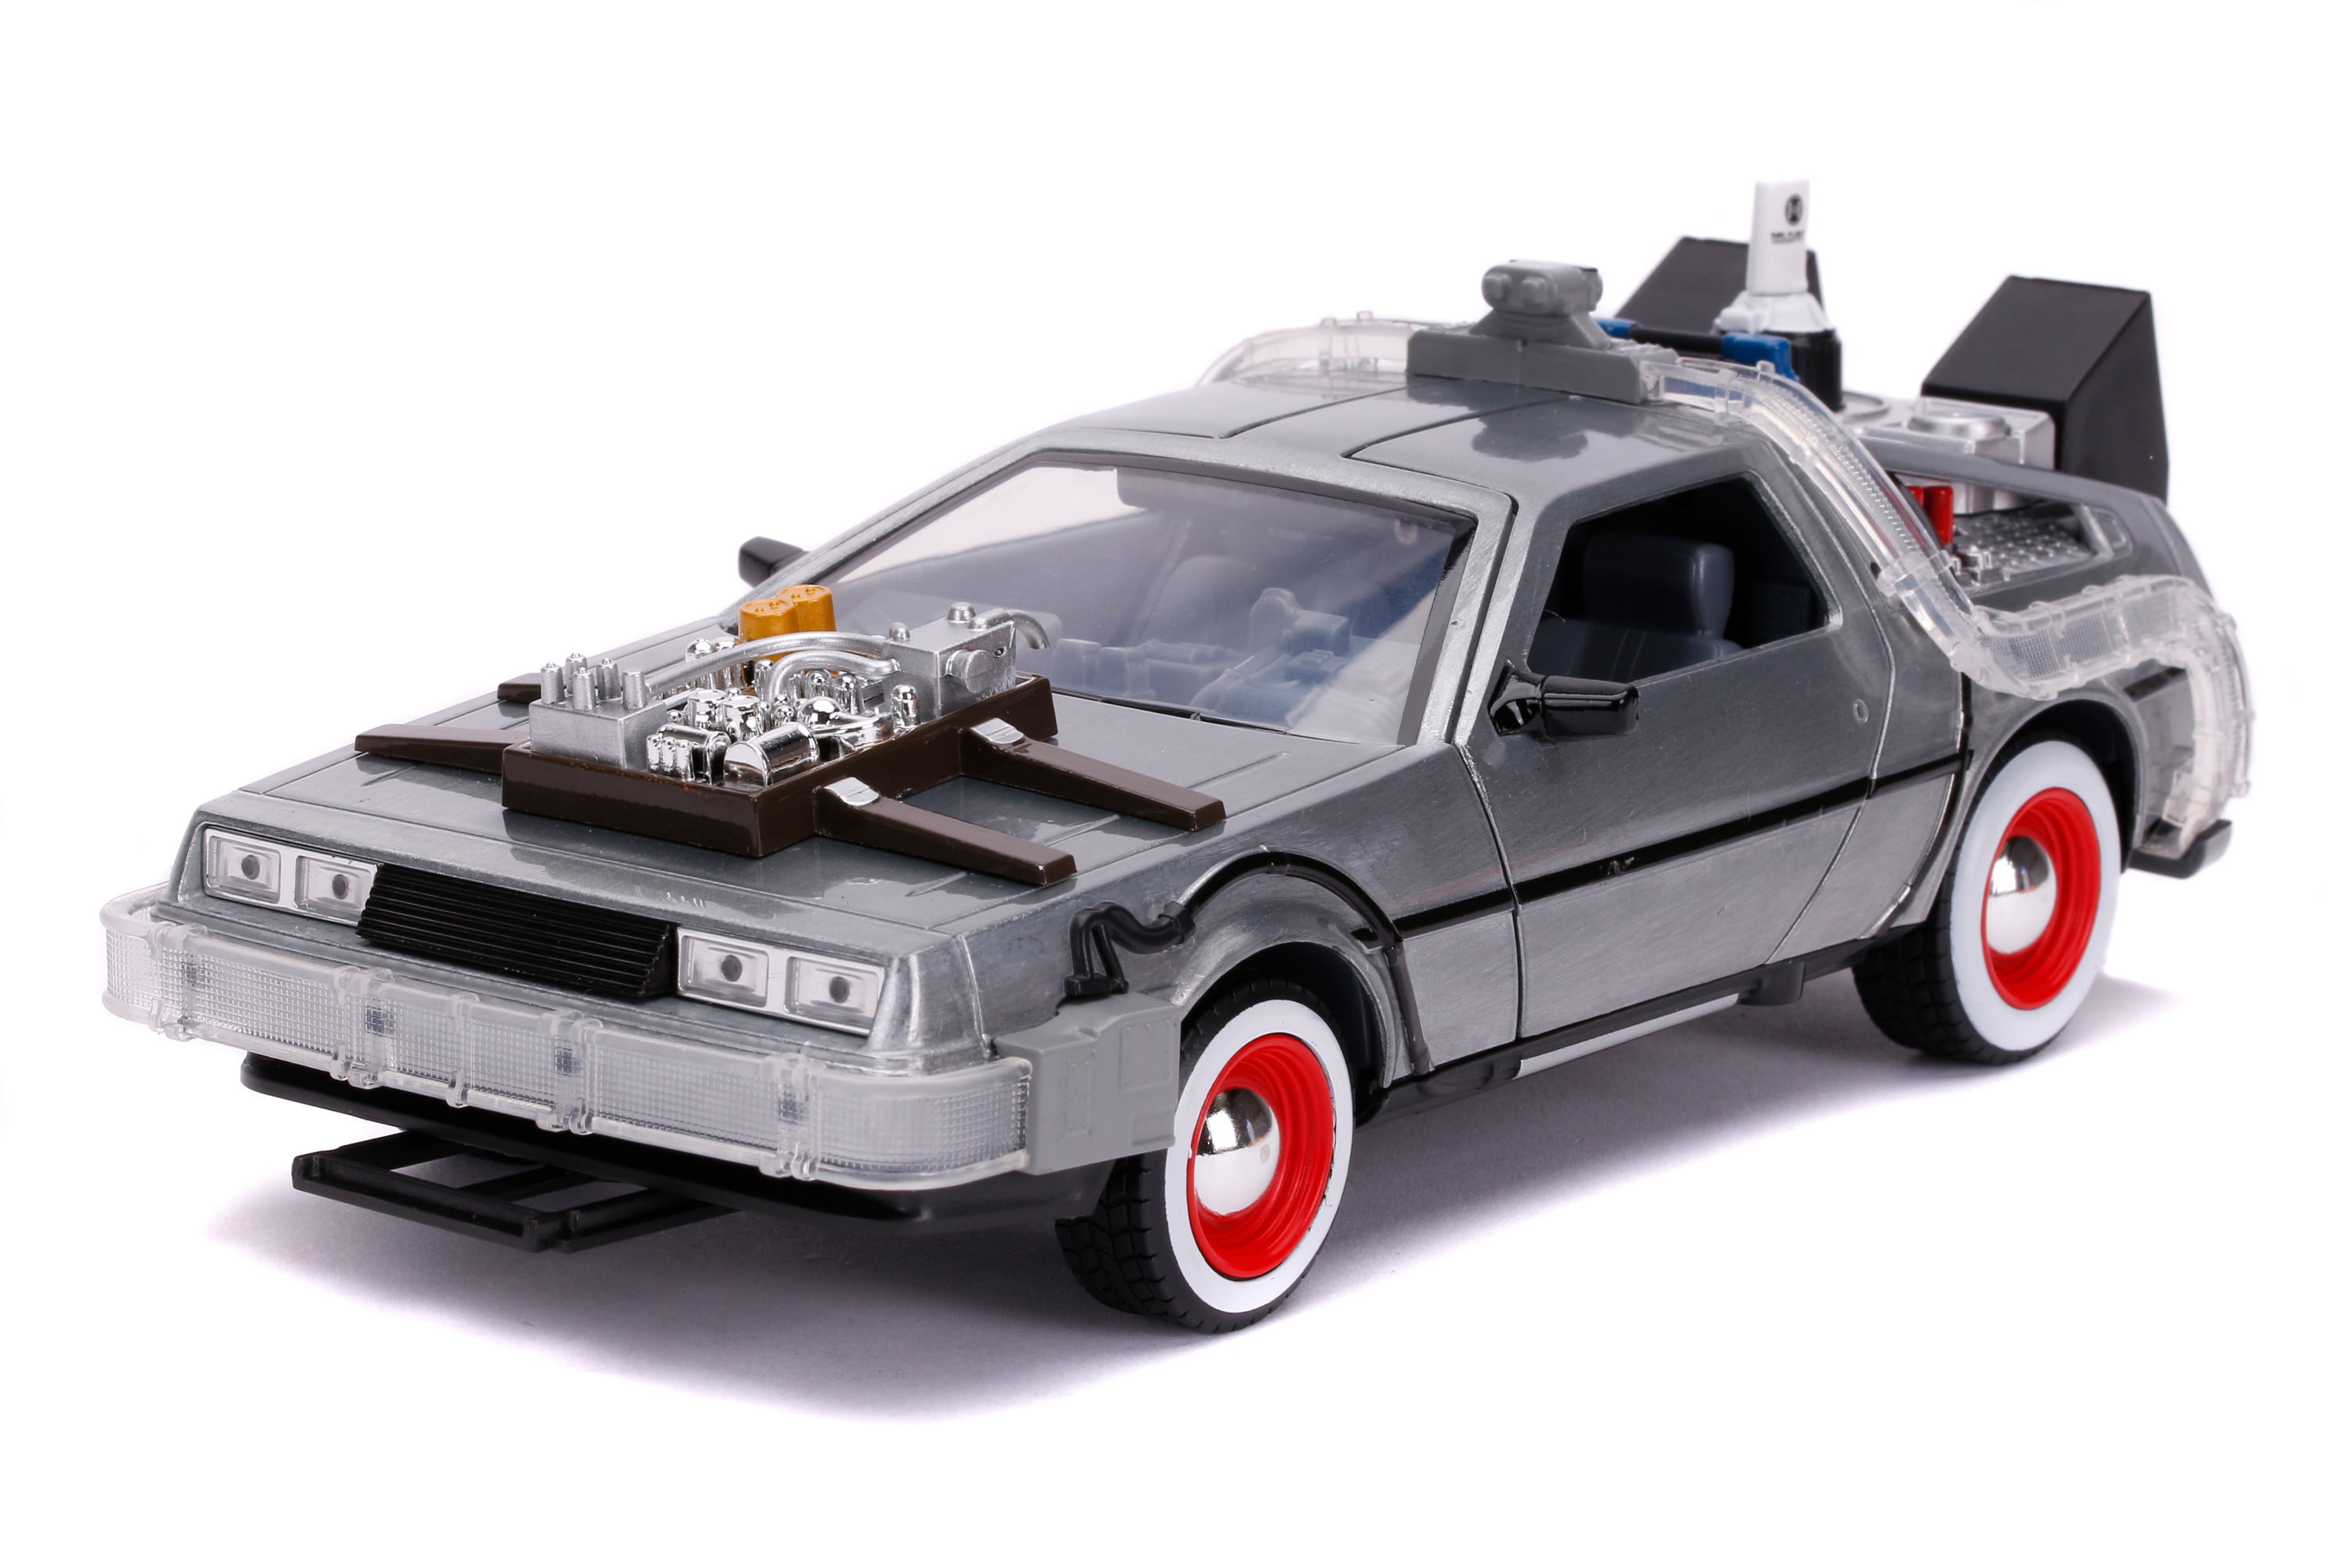 WELLY 1:24 Back To The Future Delorean Time Machine Die-cast Metla Toy Model Car 